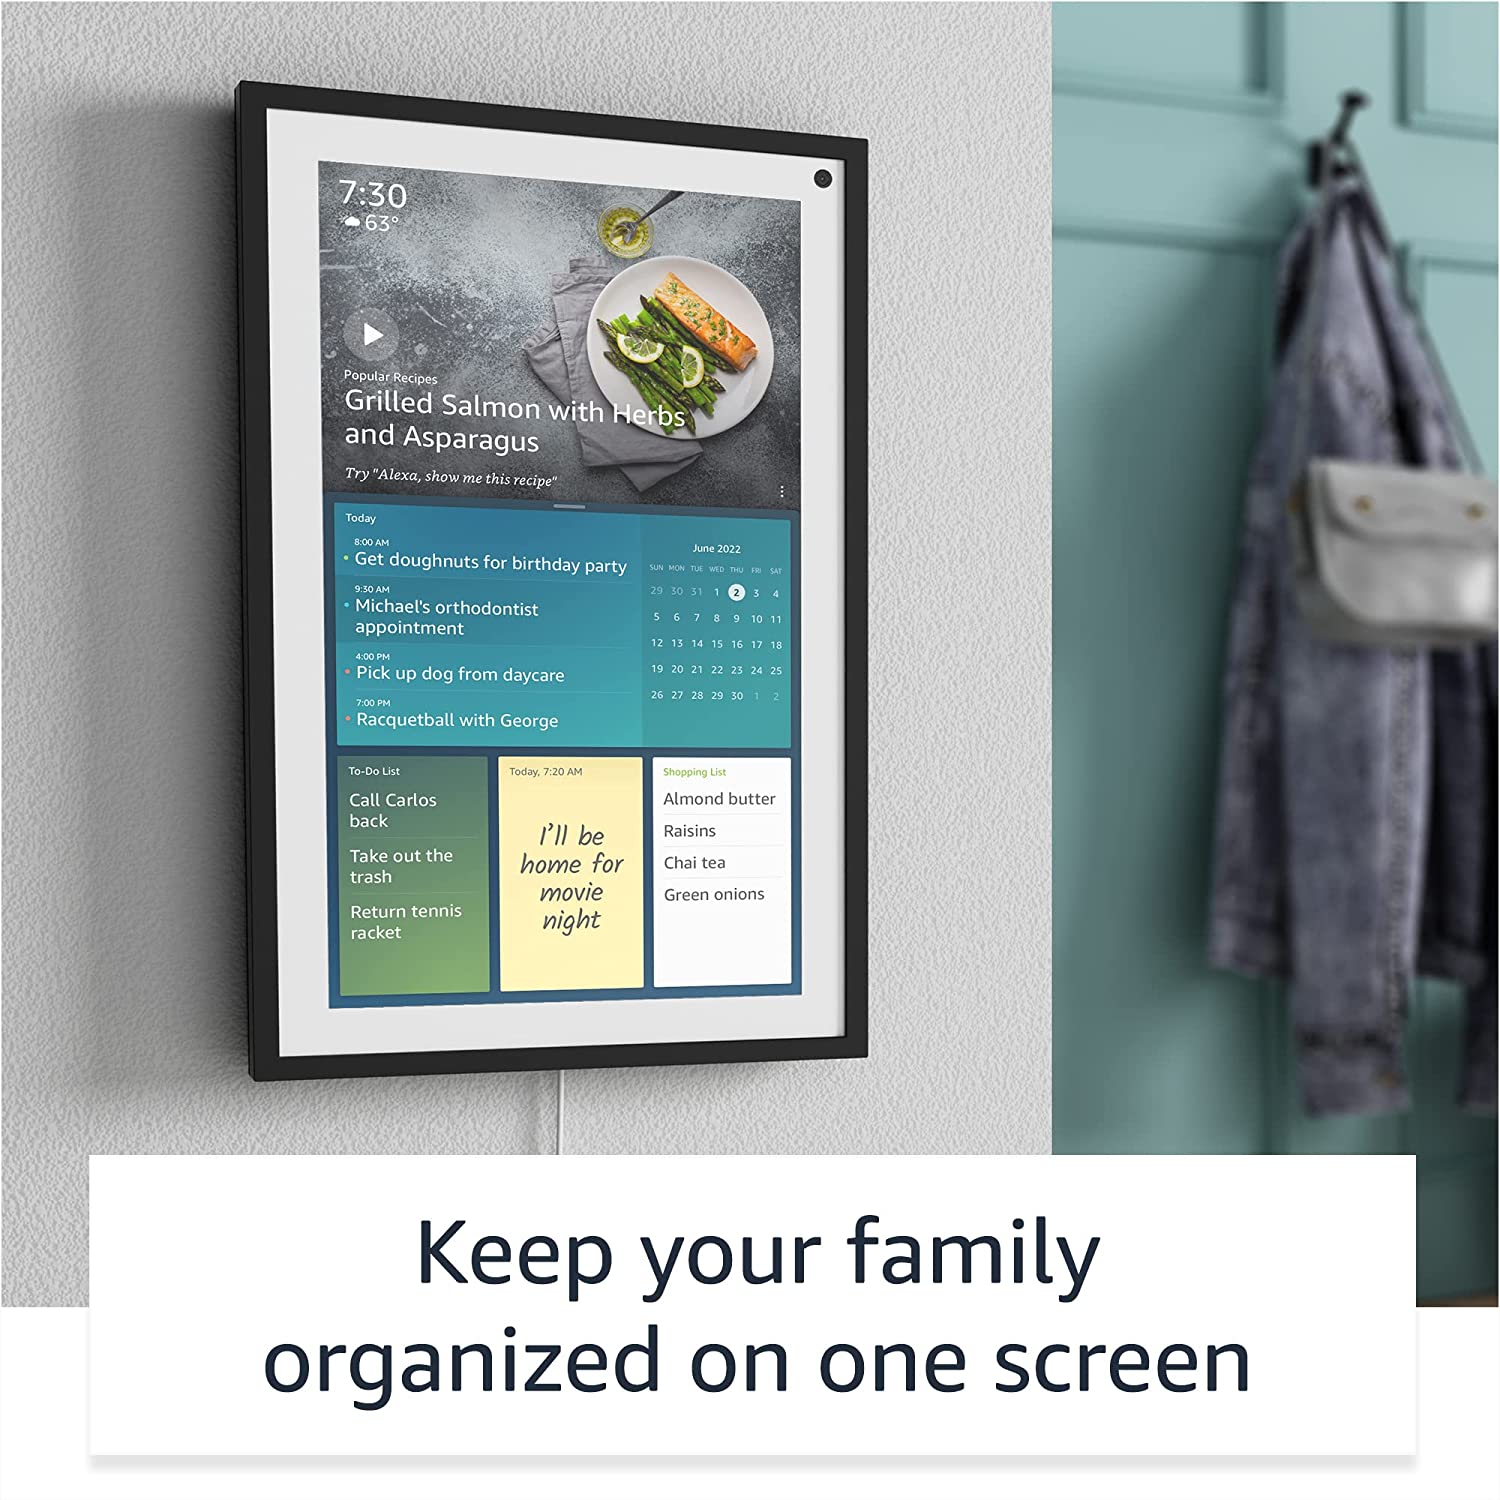 Introducing Echo Show 15, Full HD 15.6" smart display for family organization with Alexa